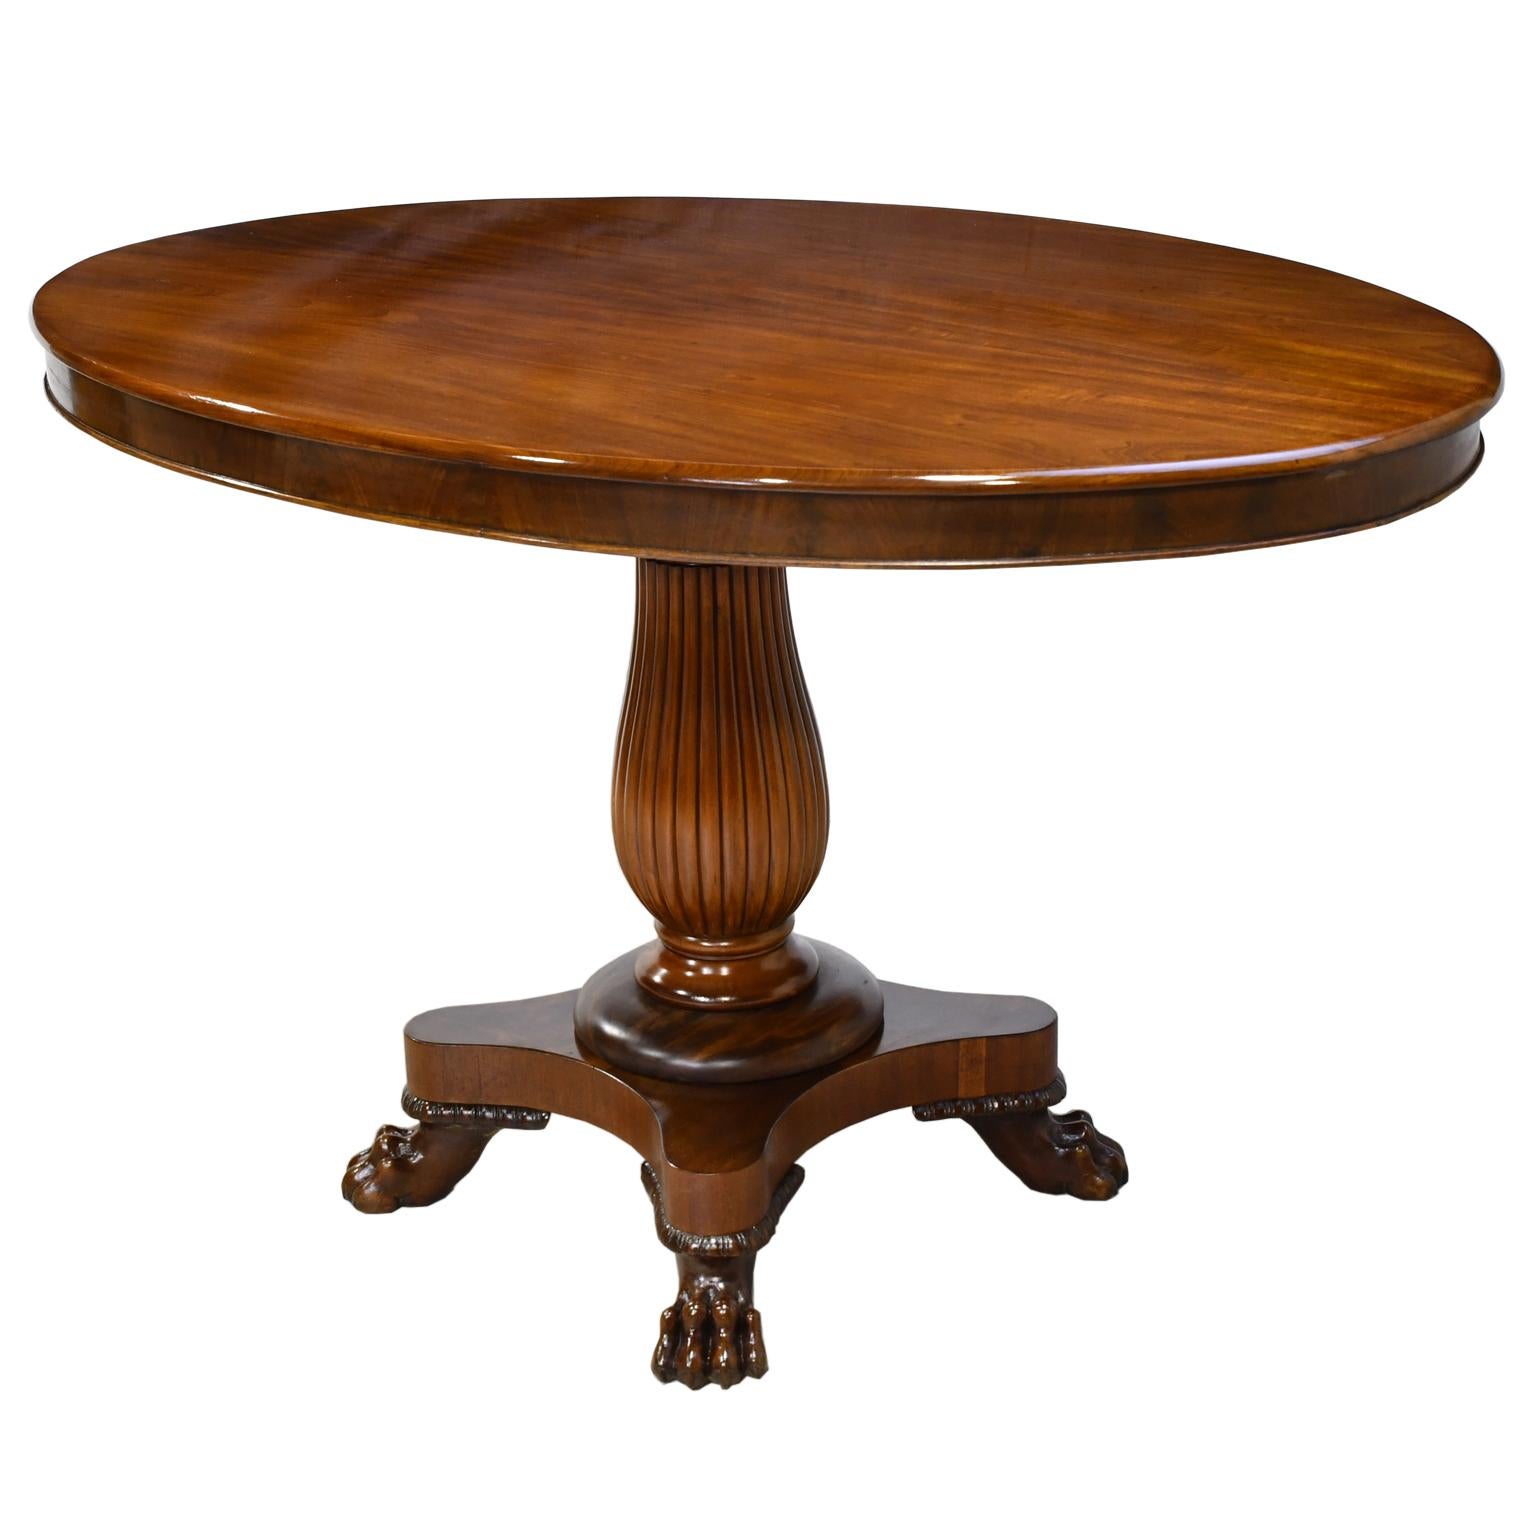 19th Century Empire Pedestal Table in West Indies Mahogany w/ Oval Top, Denmark, circa 1825